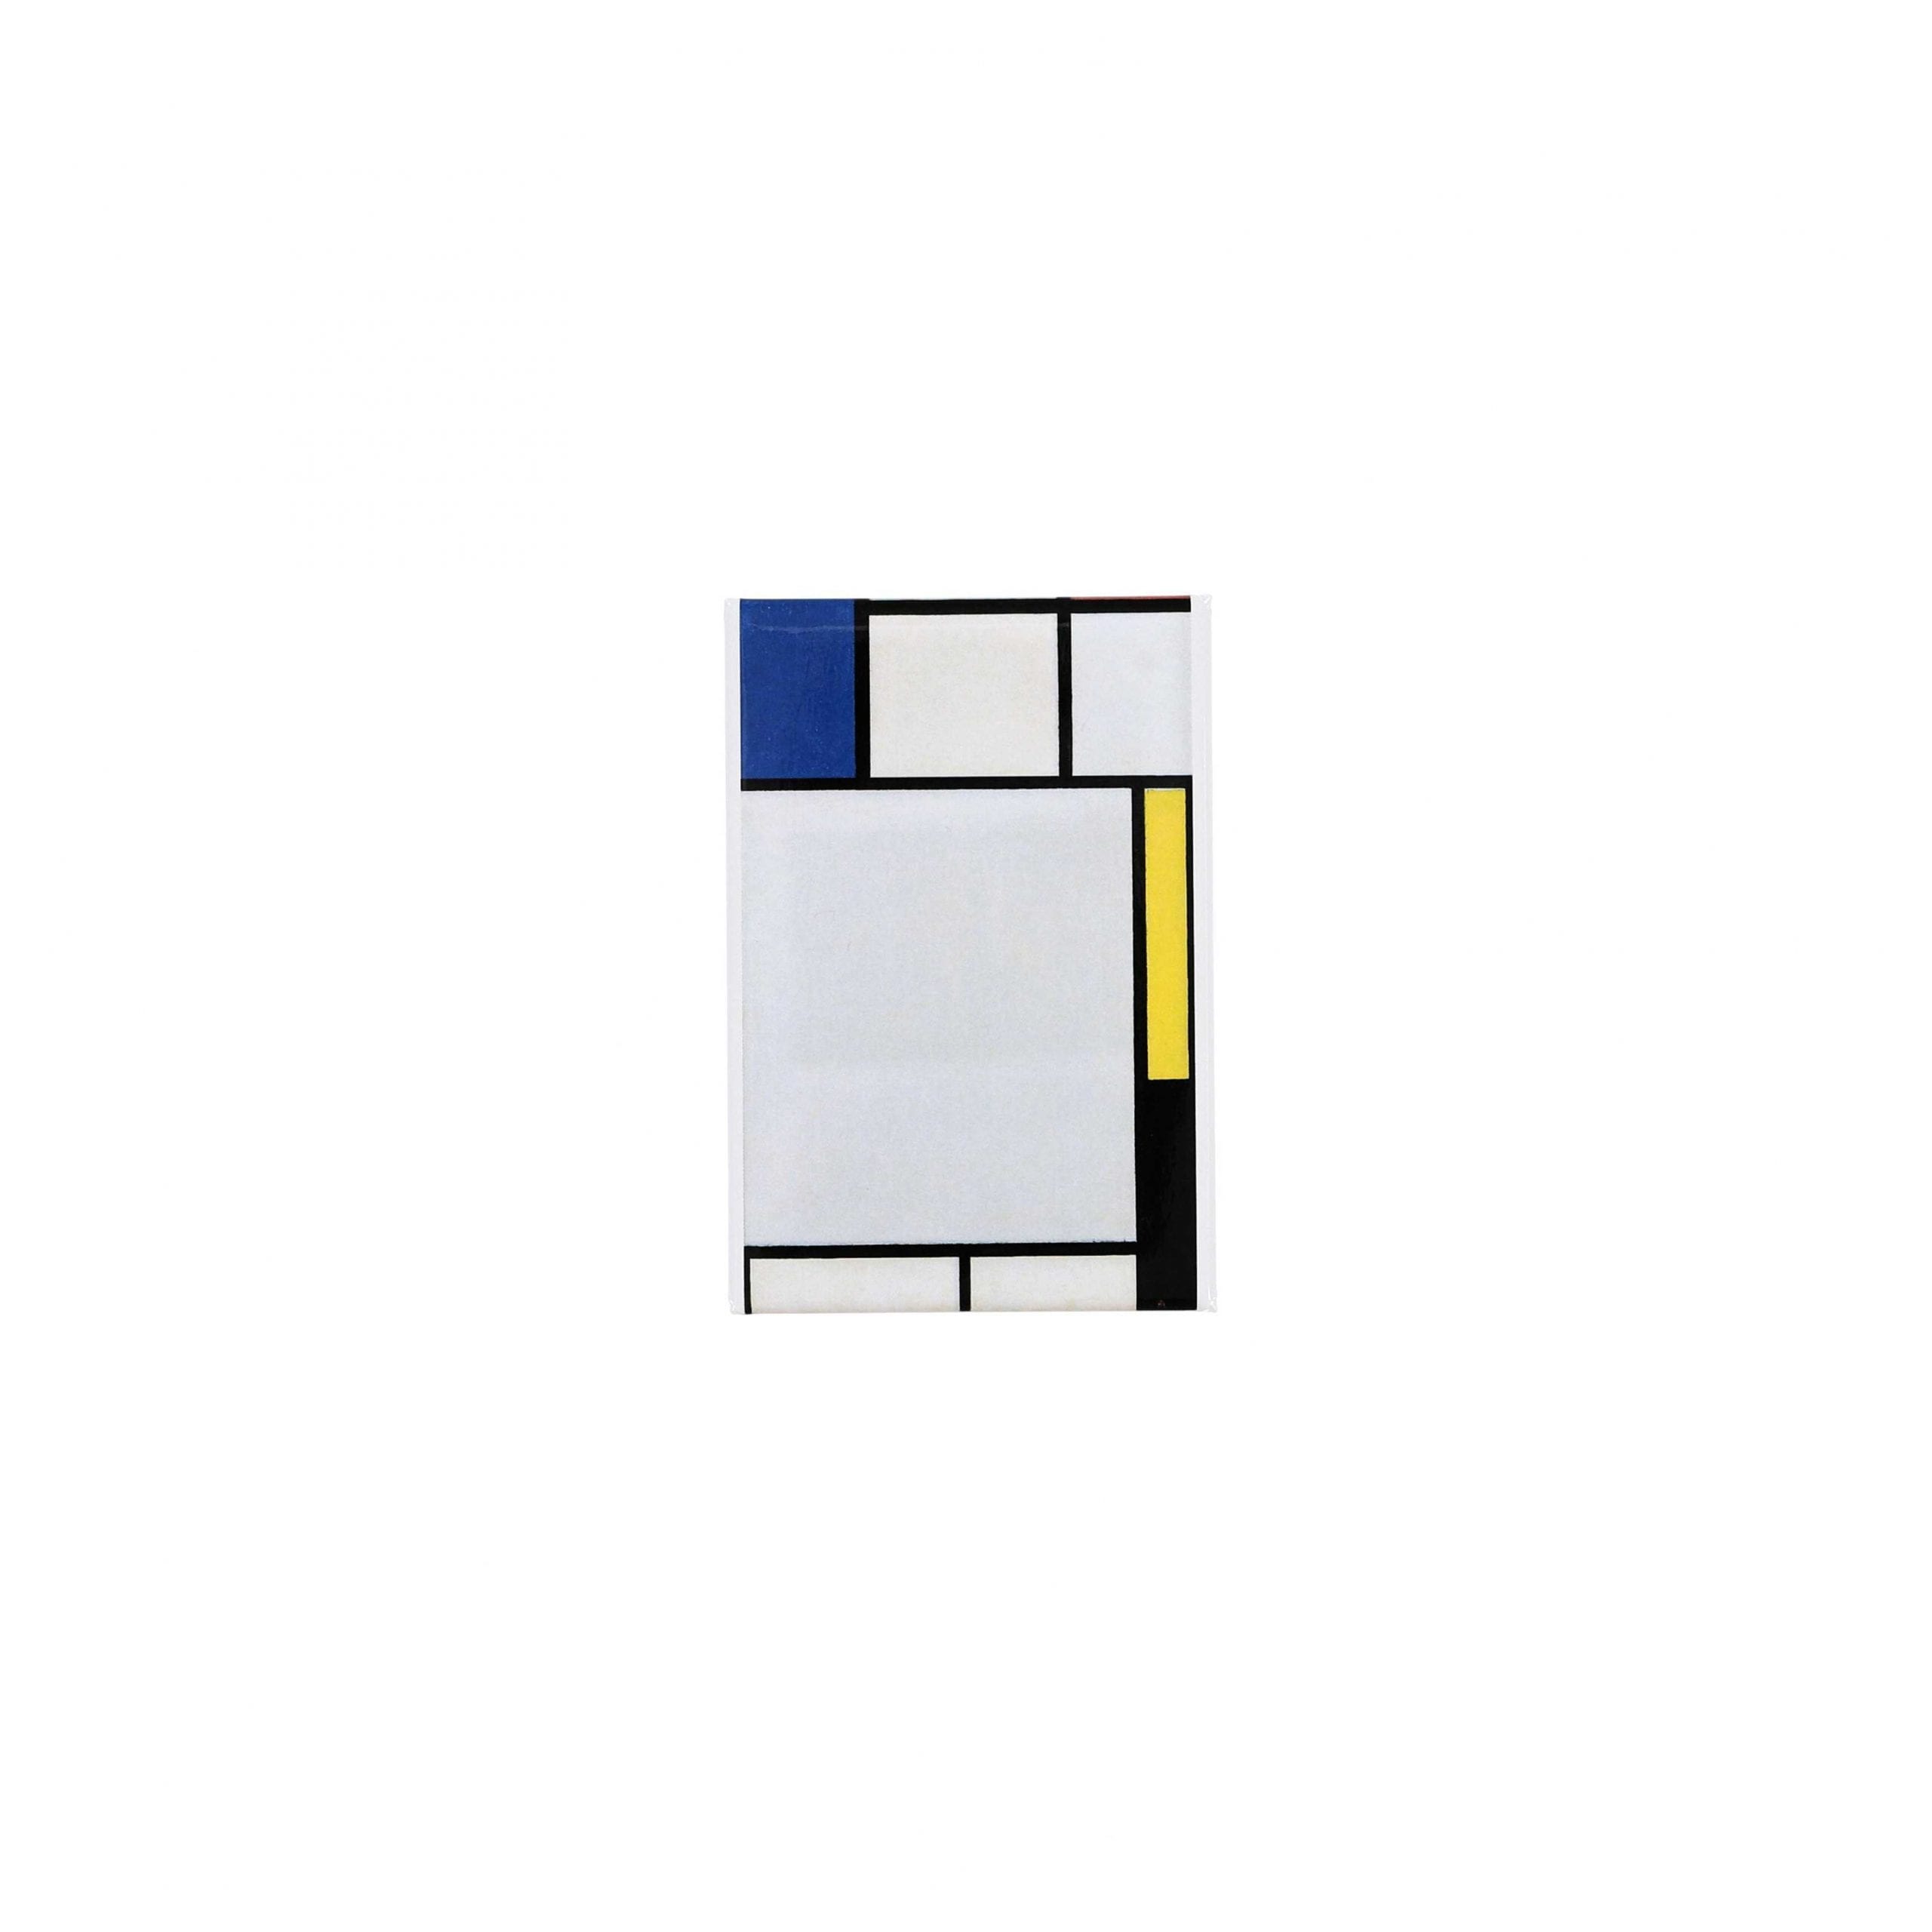 Magnet Piet Mondrian Composition with blue, red, yellow and black